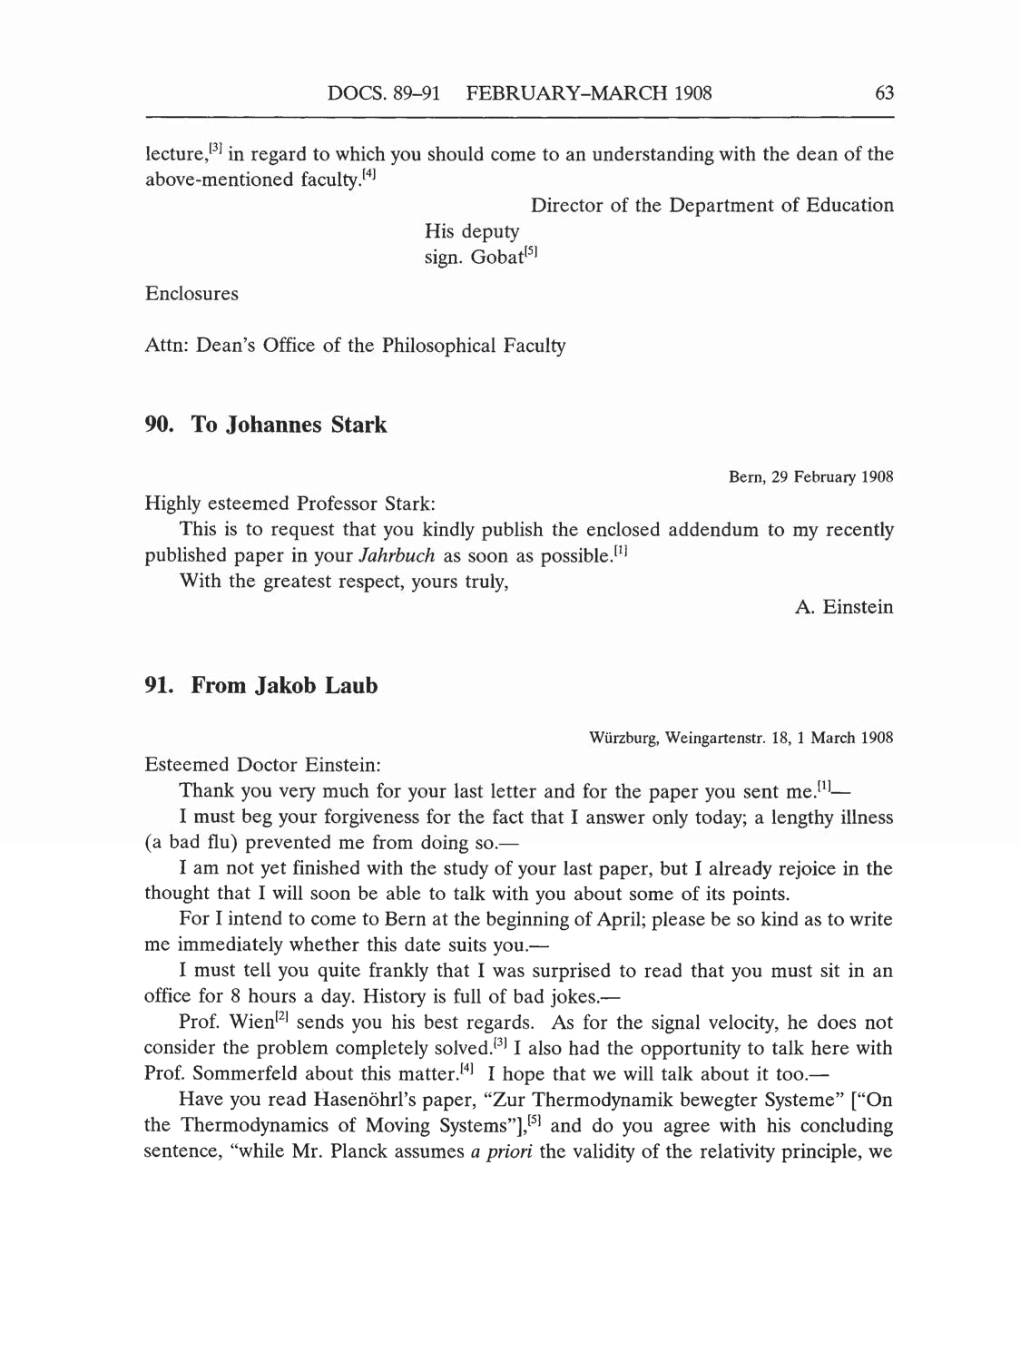 Volume 5: The Swiss Years: Correspondence, 1902-1914 (English translation supplement) page 63